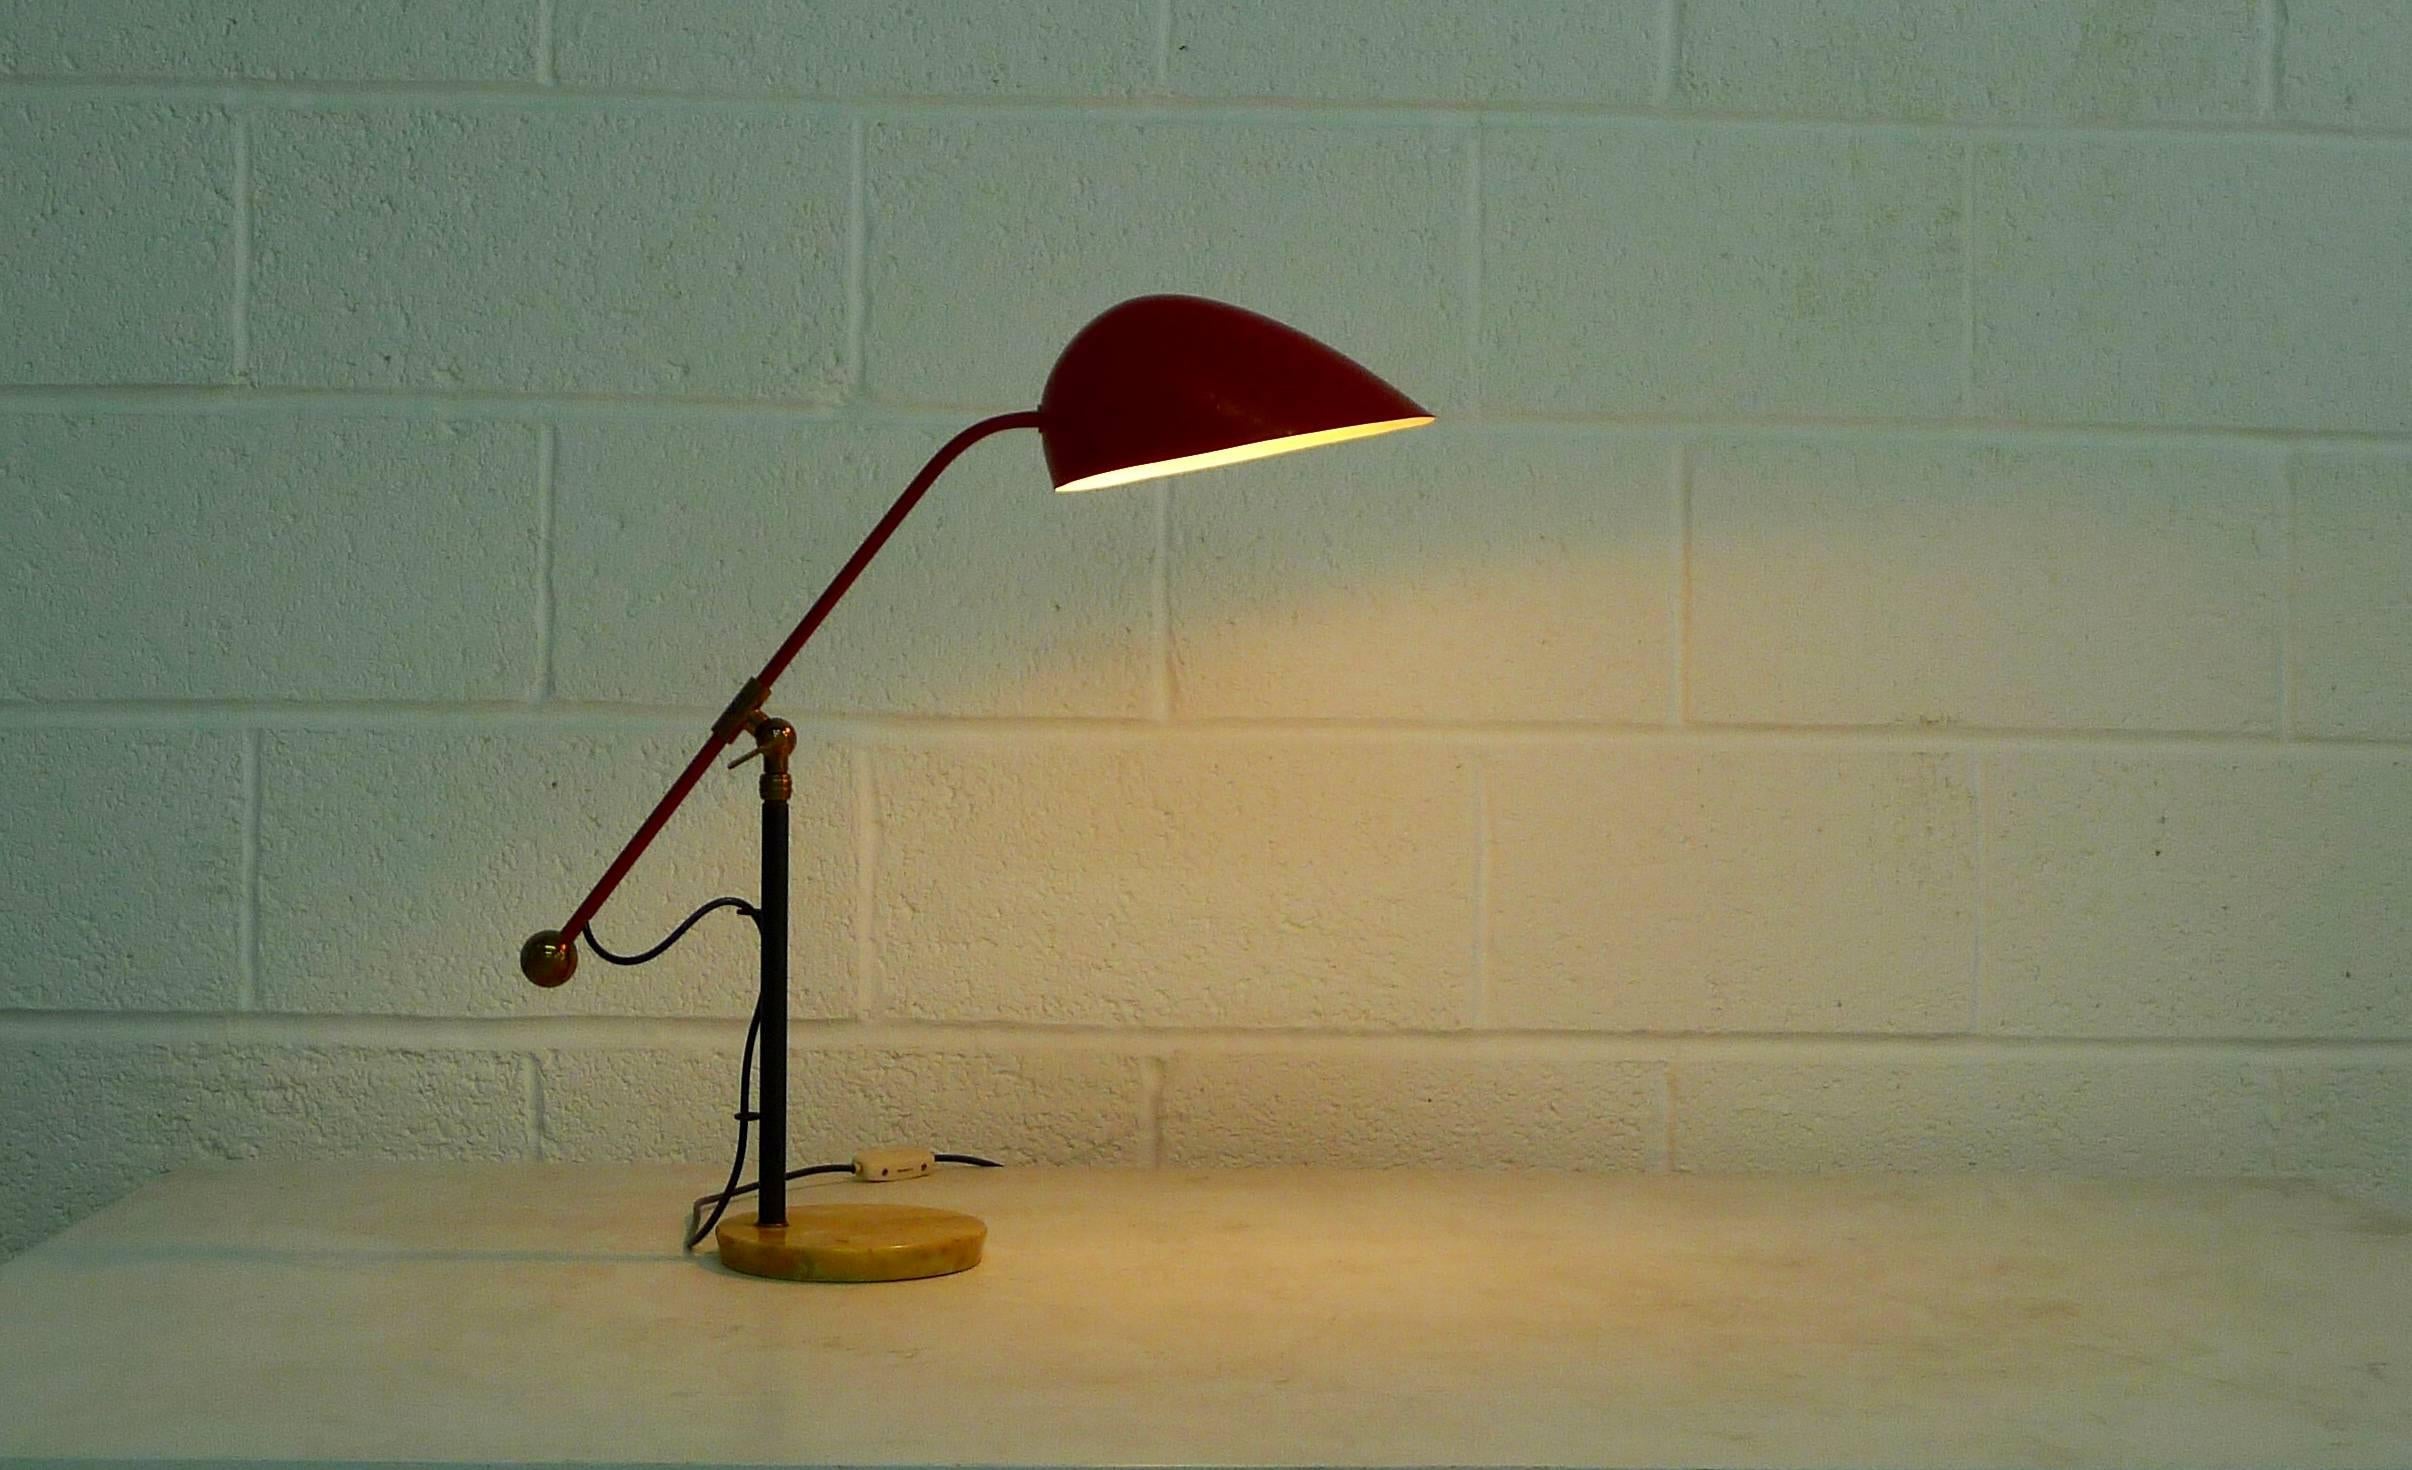 Angelo Brotto designed table lamp, Italy, 1960s.

Beautifully aged marble base, lower stem is black enamelled, brass upright is height adjustable from 57 cm to 80 cm through a locking ring at the top of the black section. The red enamelled arm